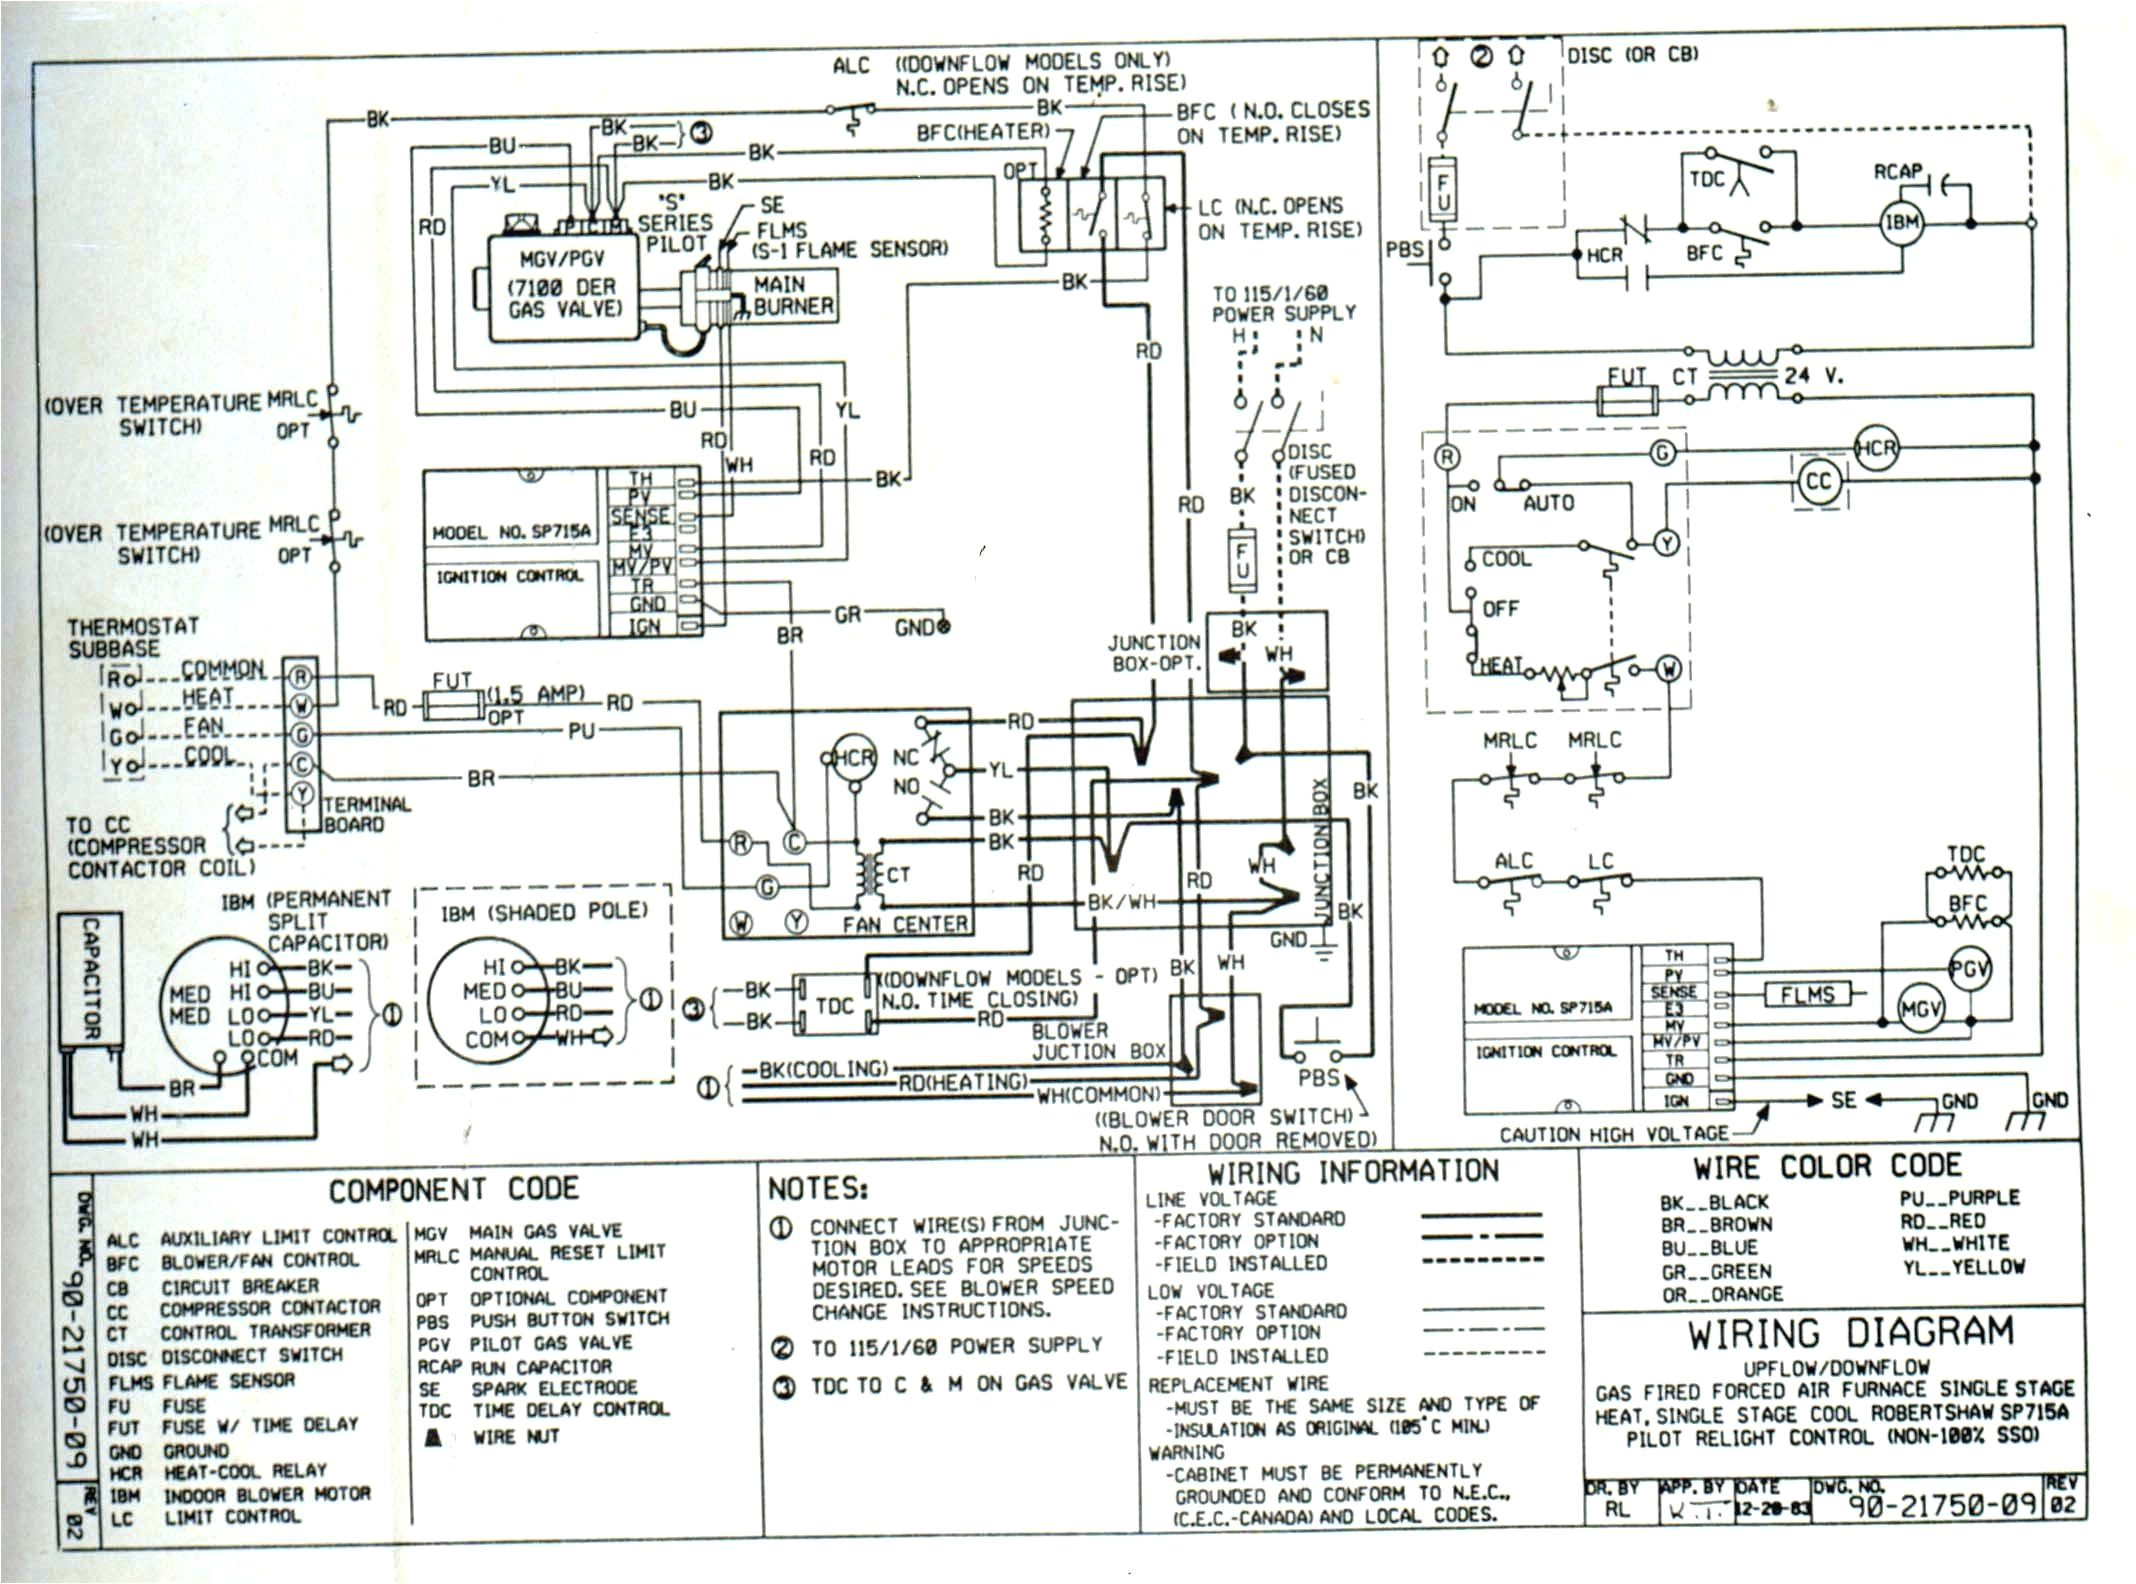 air conditioner wiring diagram for 1200 xl wiring diagram ame air conditioner wiring diagram for 1200 xl